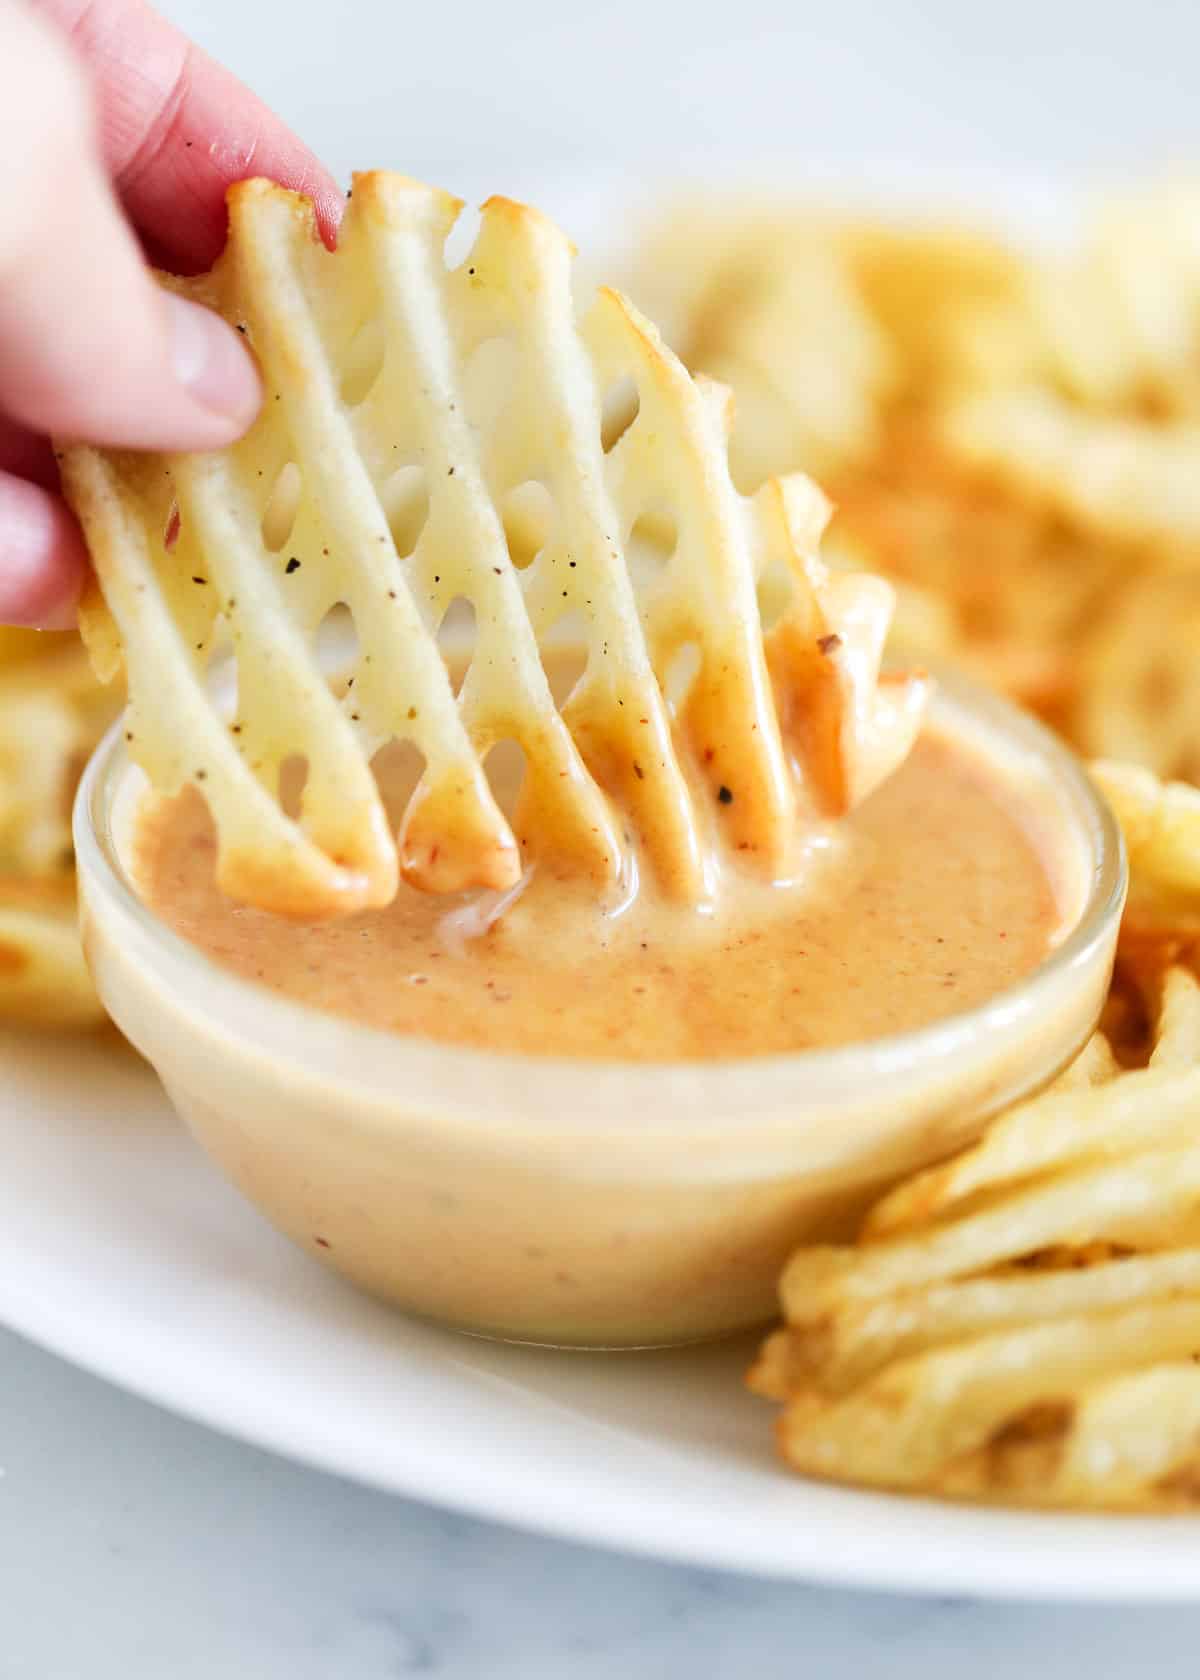 Waffle fry dipped in sauce.